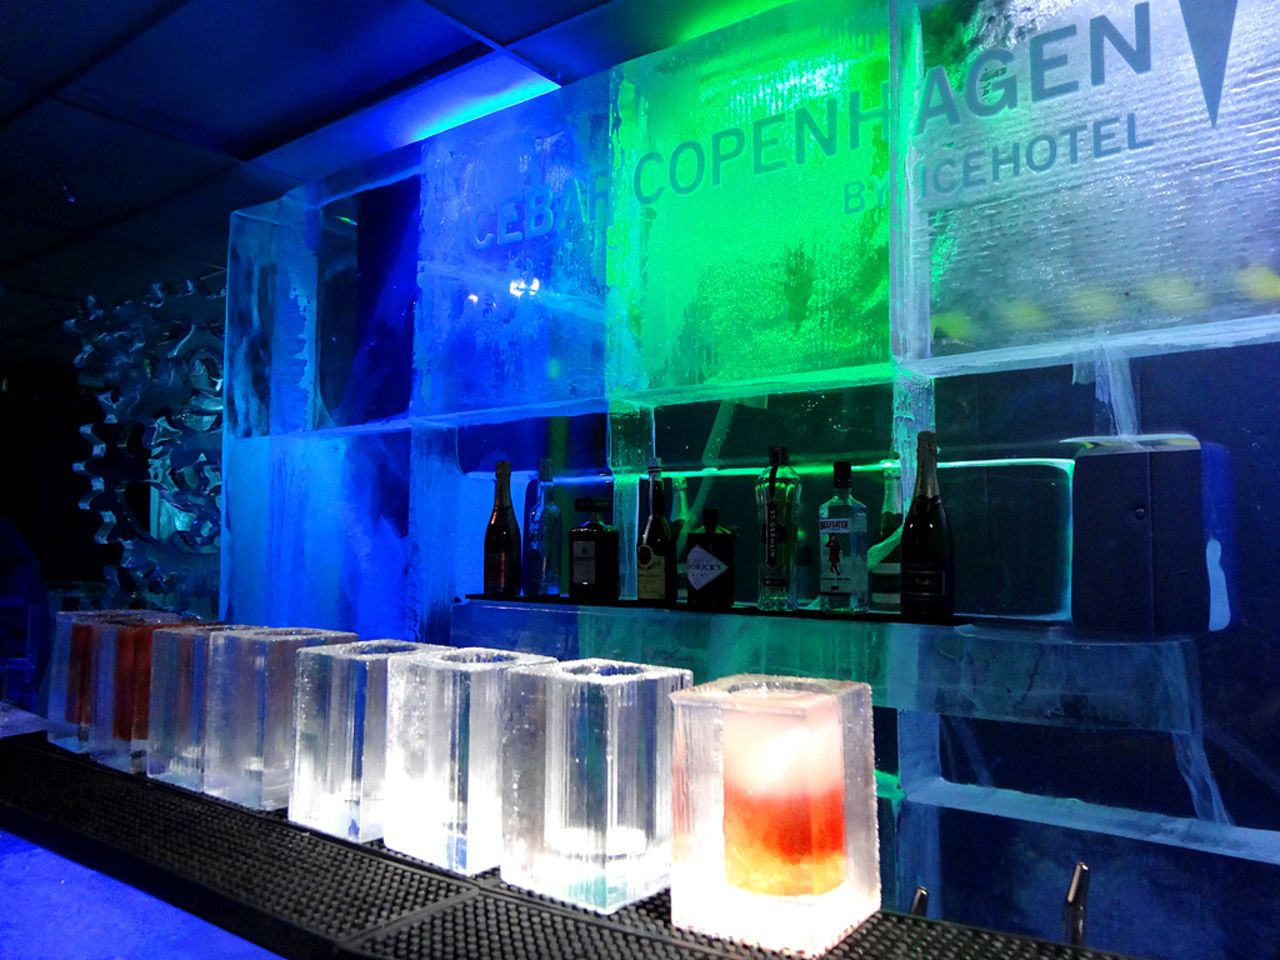 While the Icebar has popular outposts in Stockholm, Oslo and London, the Jukkasjarvi version remains the most impressive and authentic.